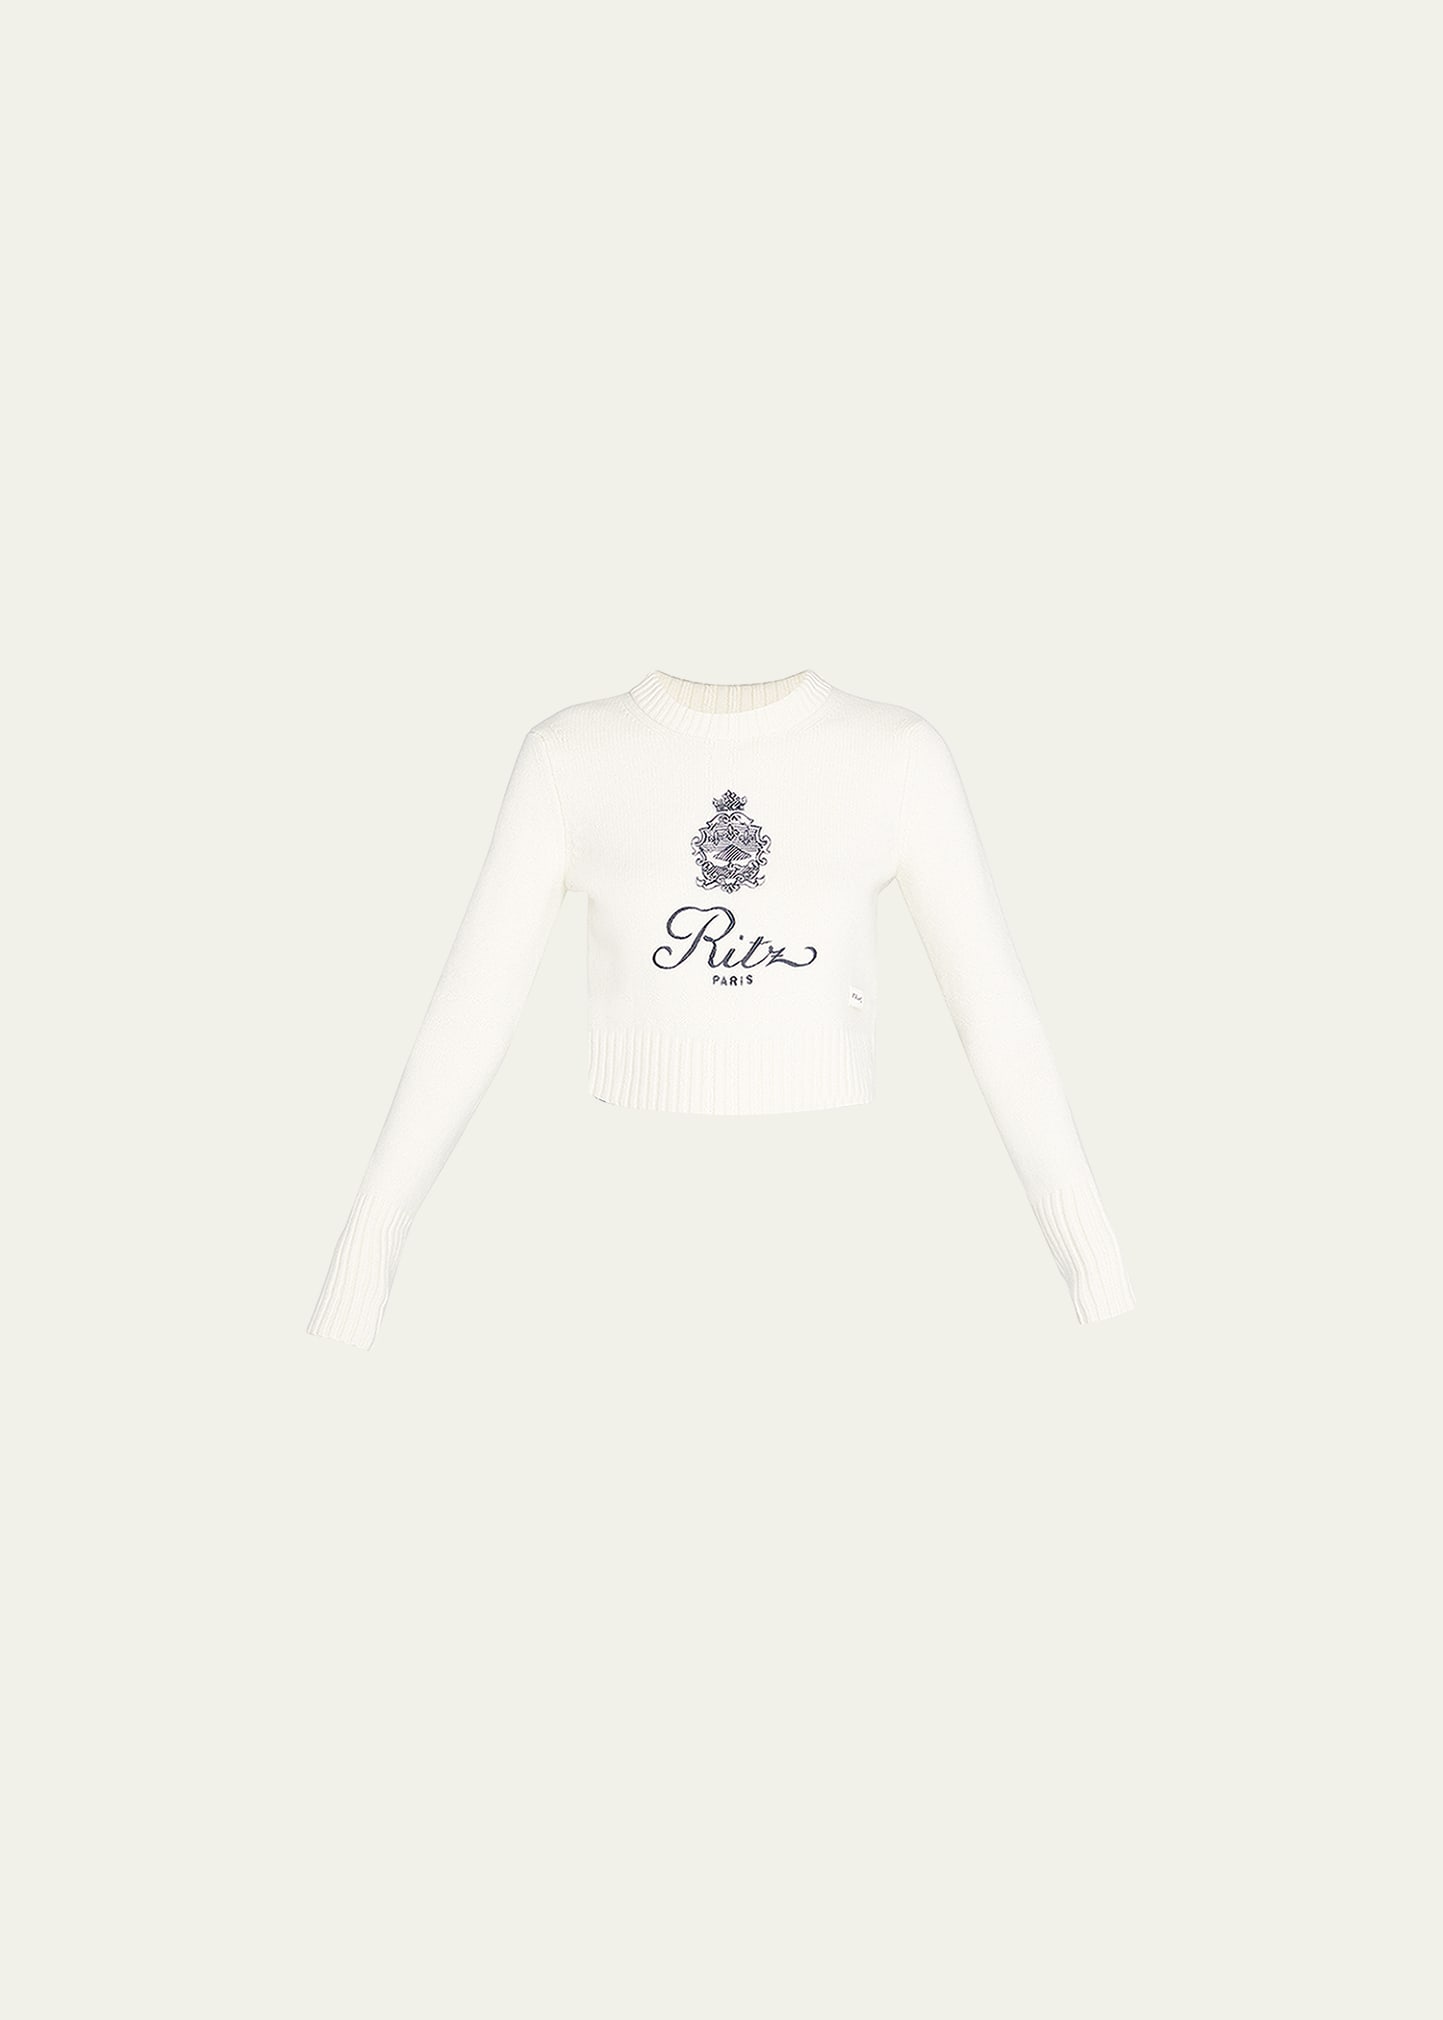 FRAME x Ritz Paris Embroidered Cropped Cashmere Sweater